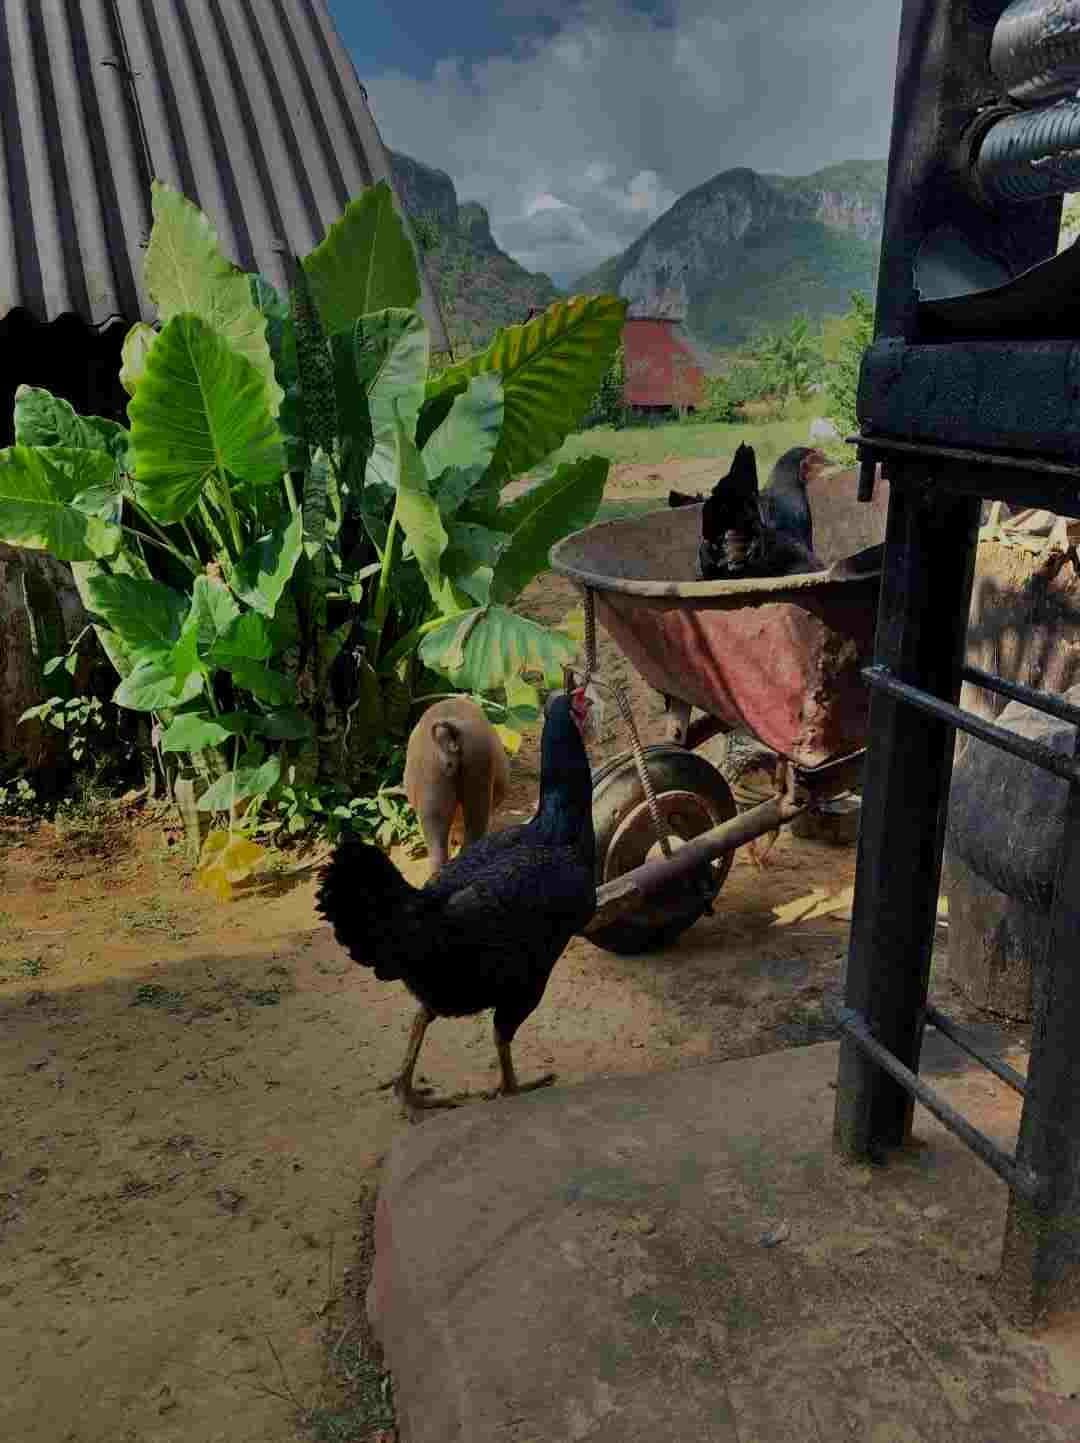 Farm life image from Vinales, with a sparkling rooster, a pig roaming, a red wheel barrow, and lots of green plants